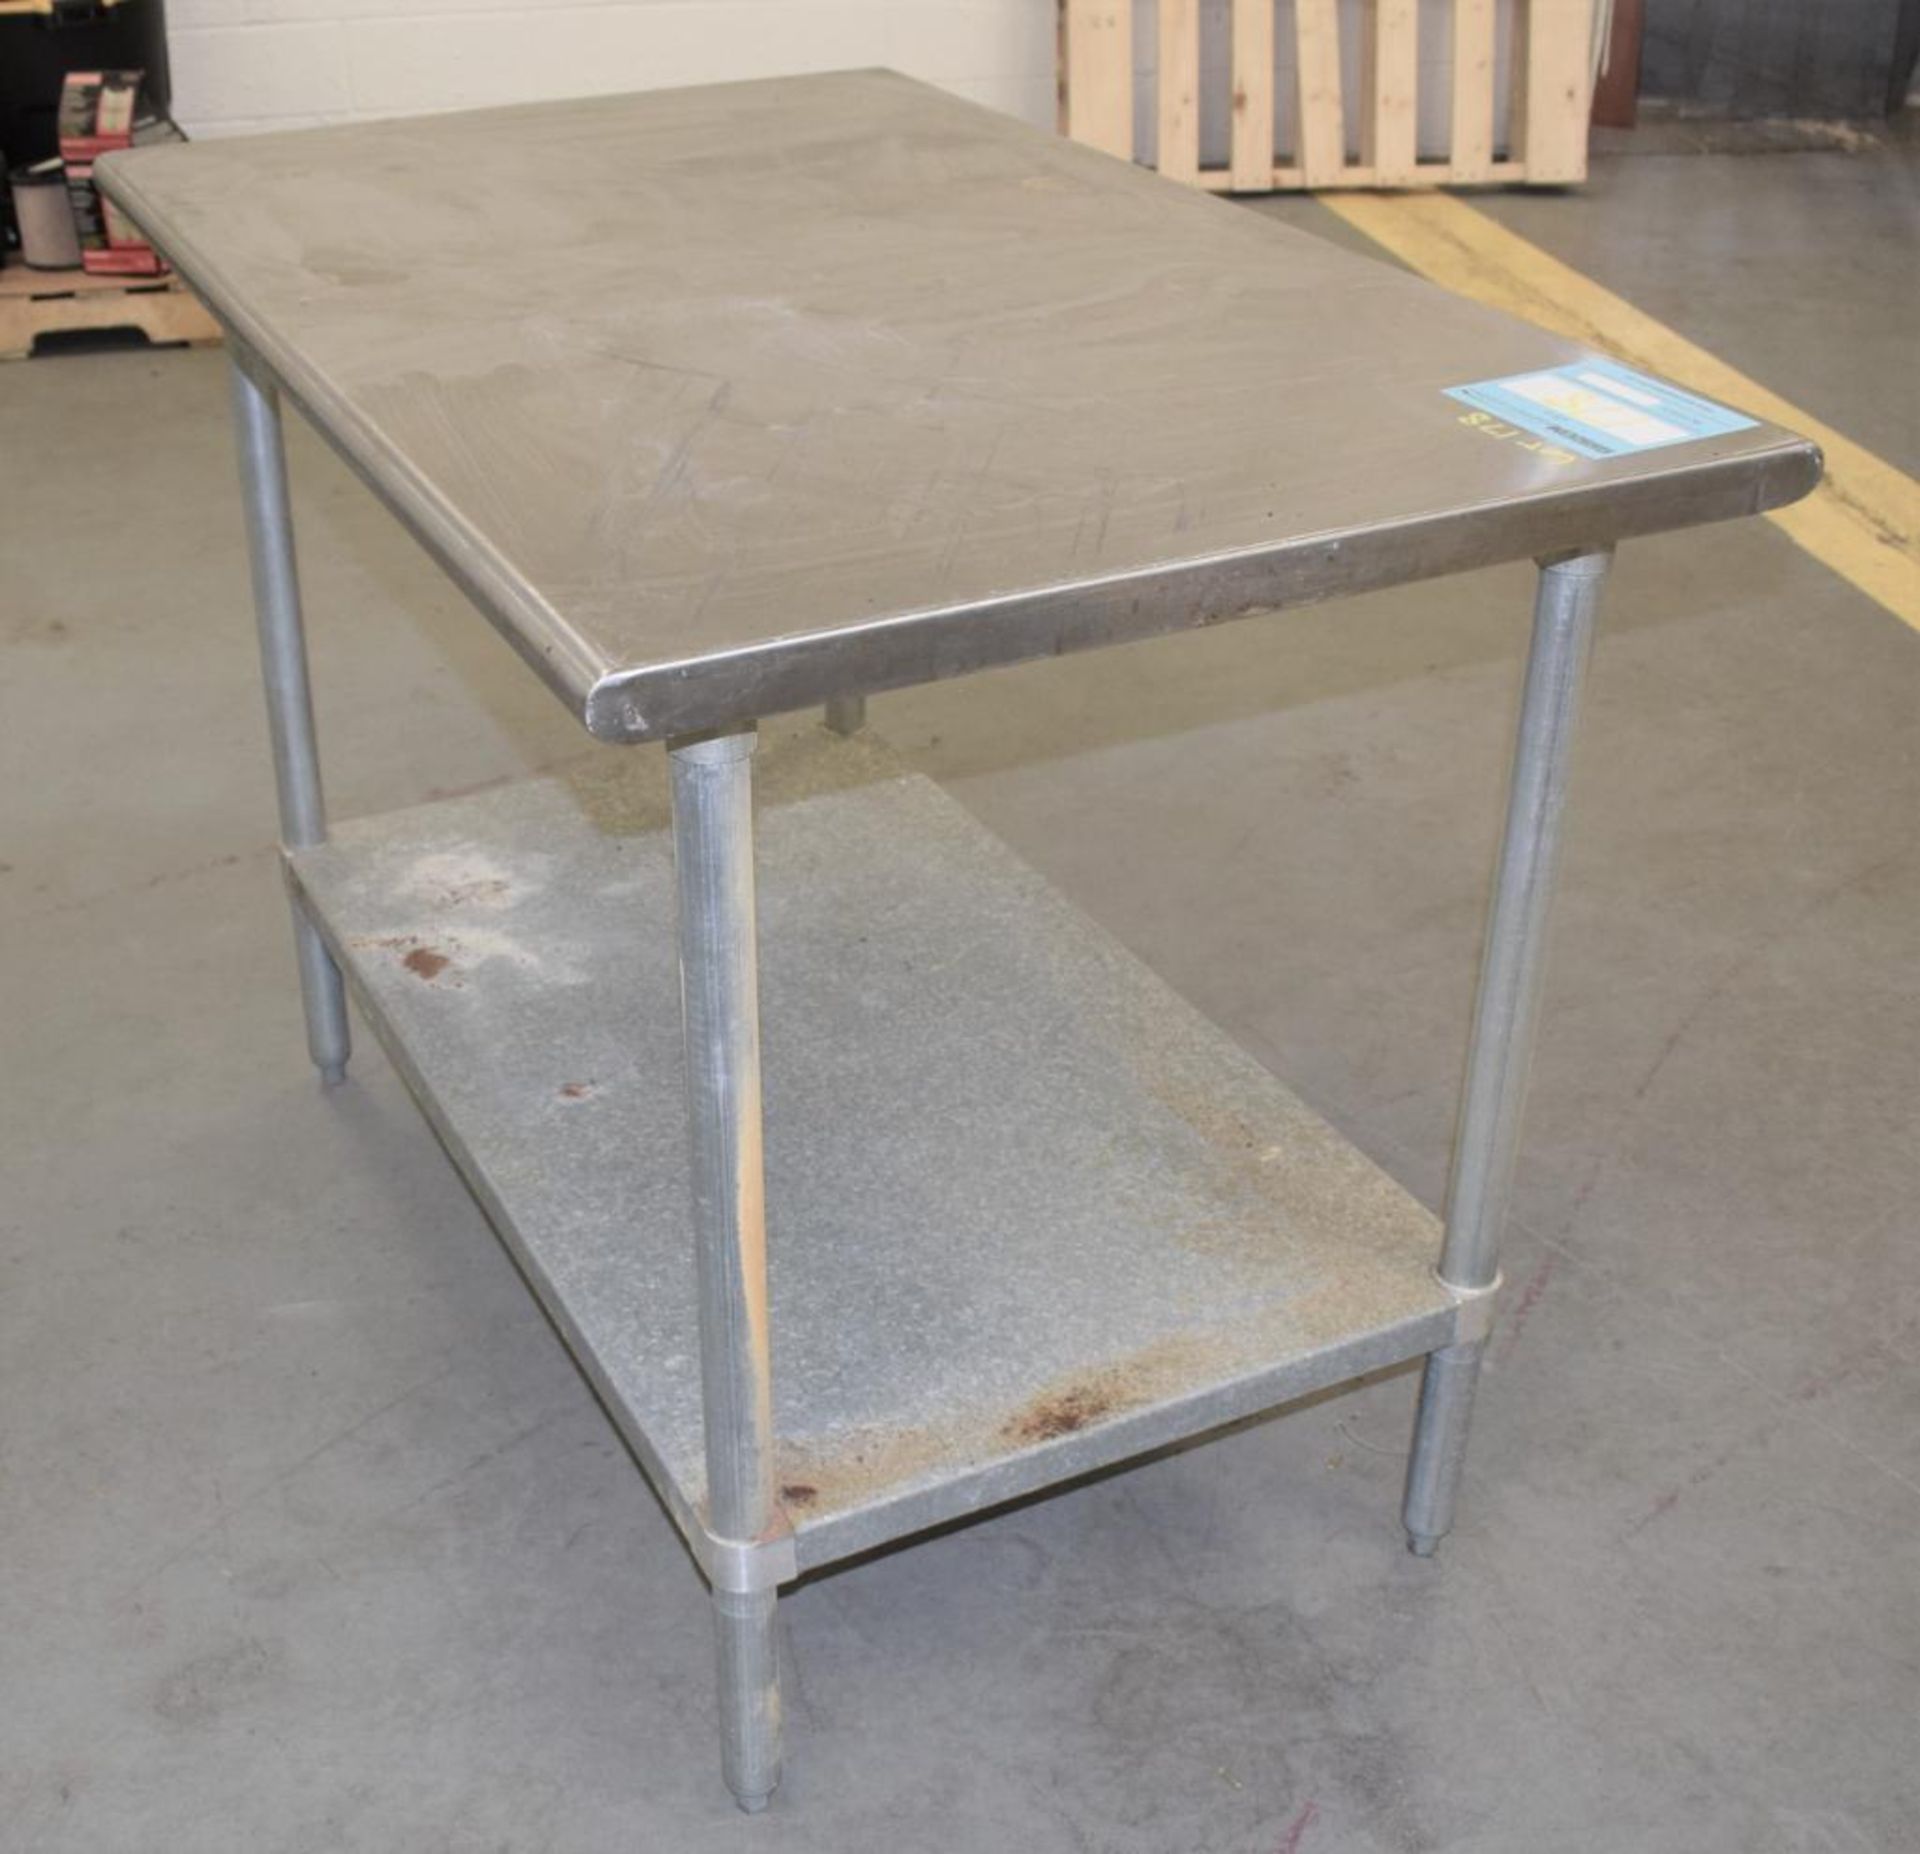 TABCO Stainless Steel Top Table. Approximate 30" wide x 48" long x 36" tall. With bottom shelf and ( - Image 2 of 5